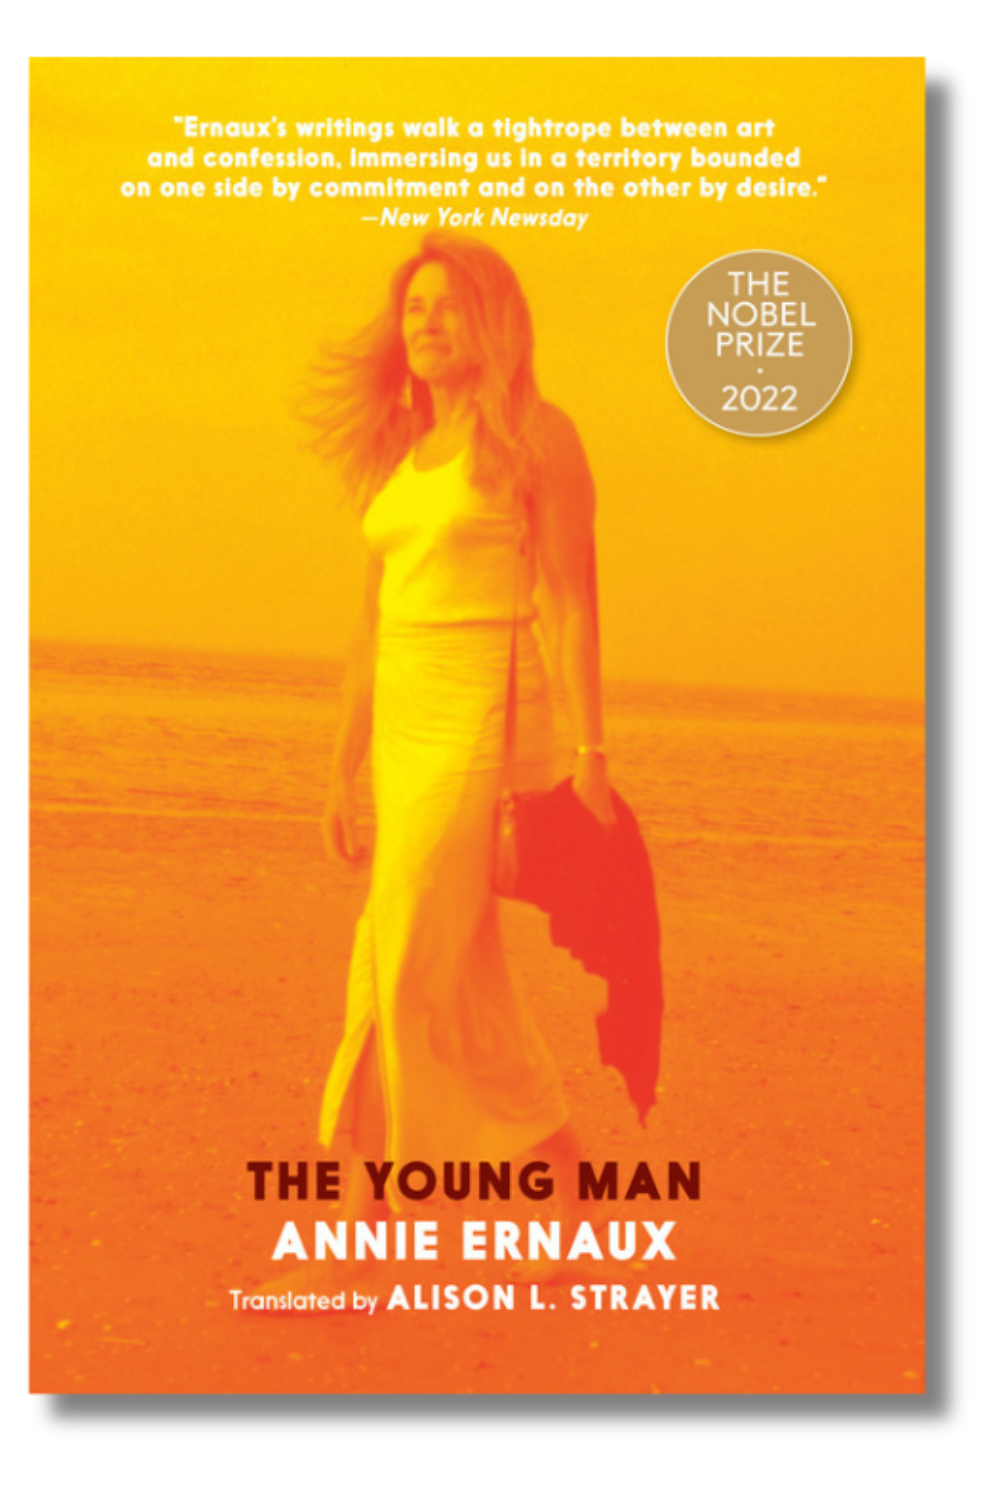 The cover of "The Young Man" by Annie Ernaux